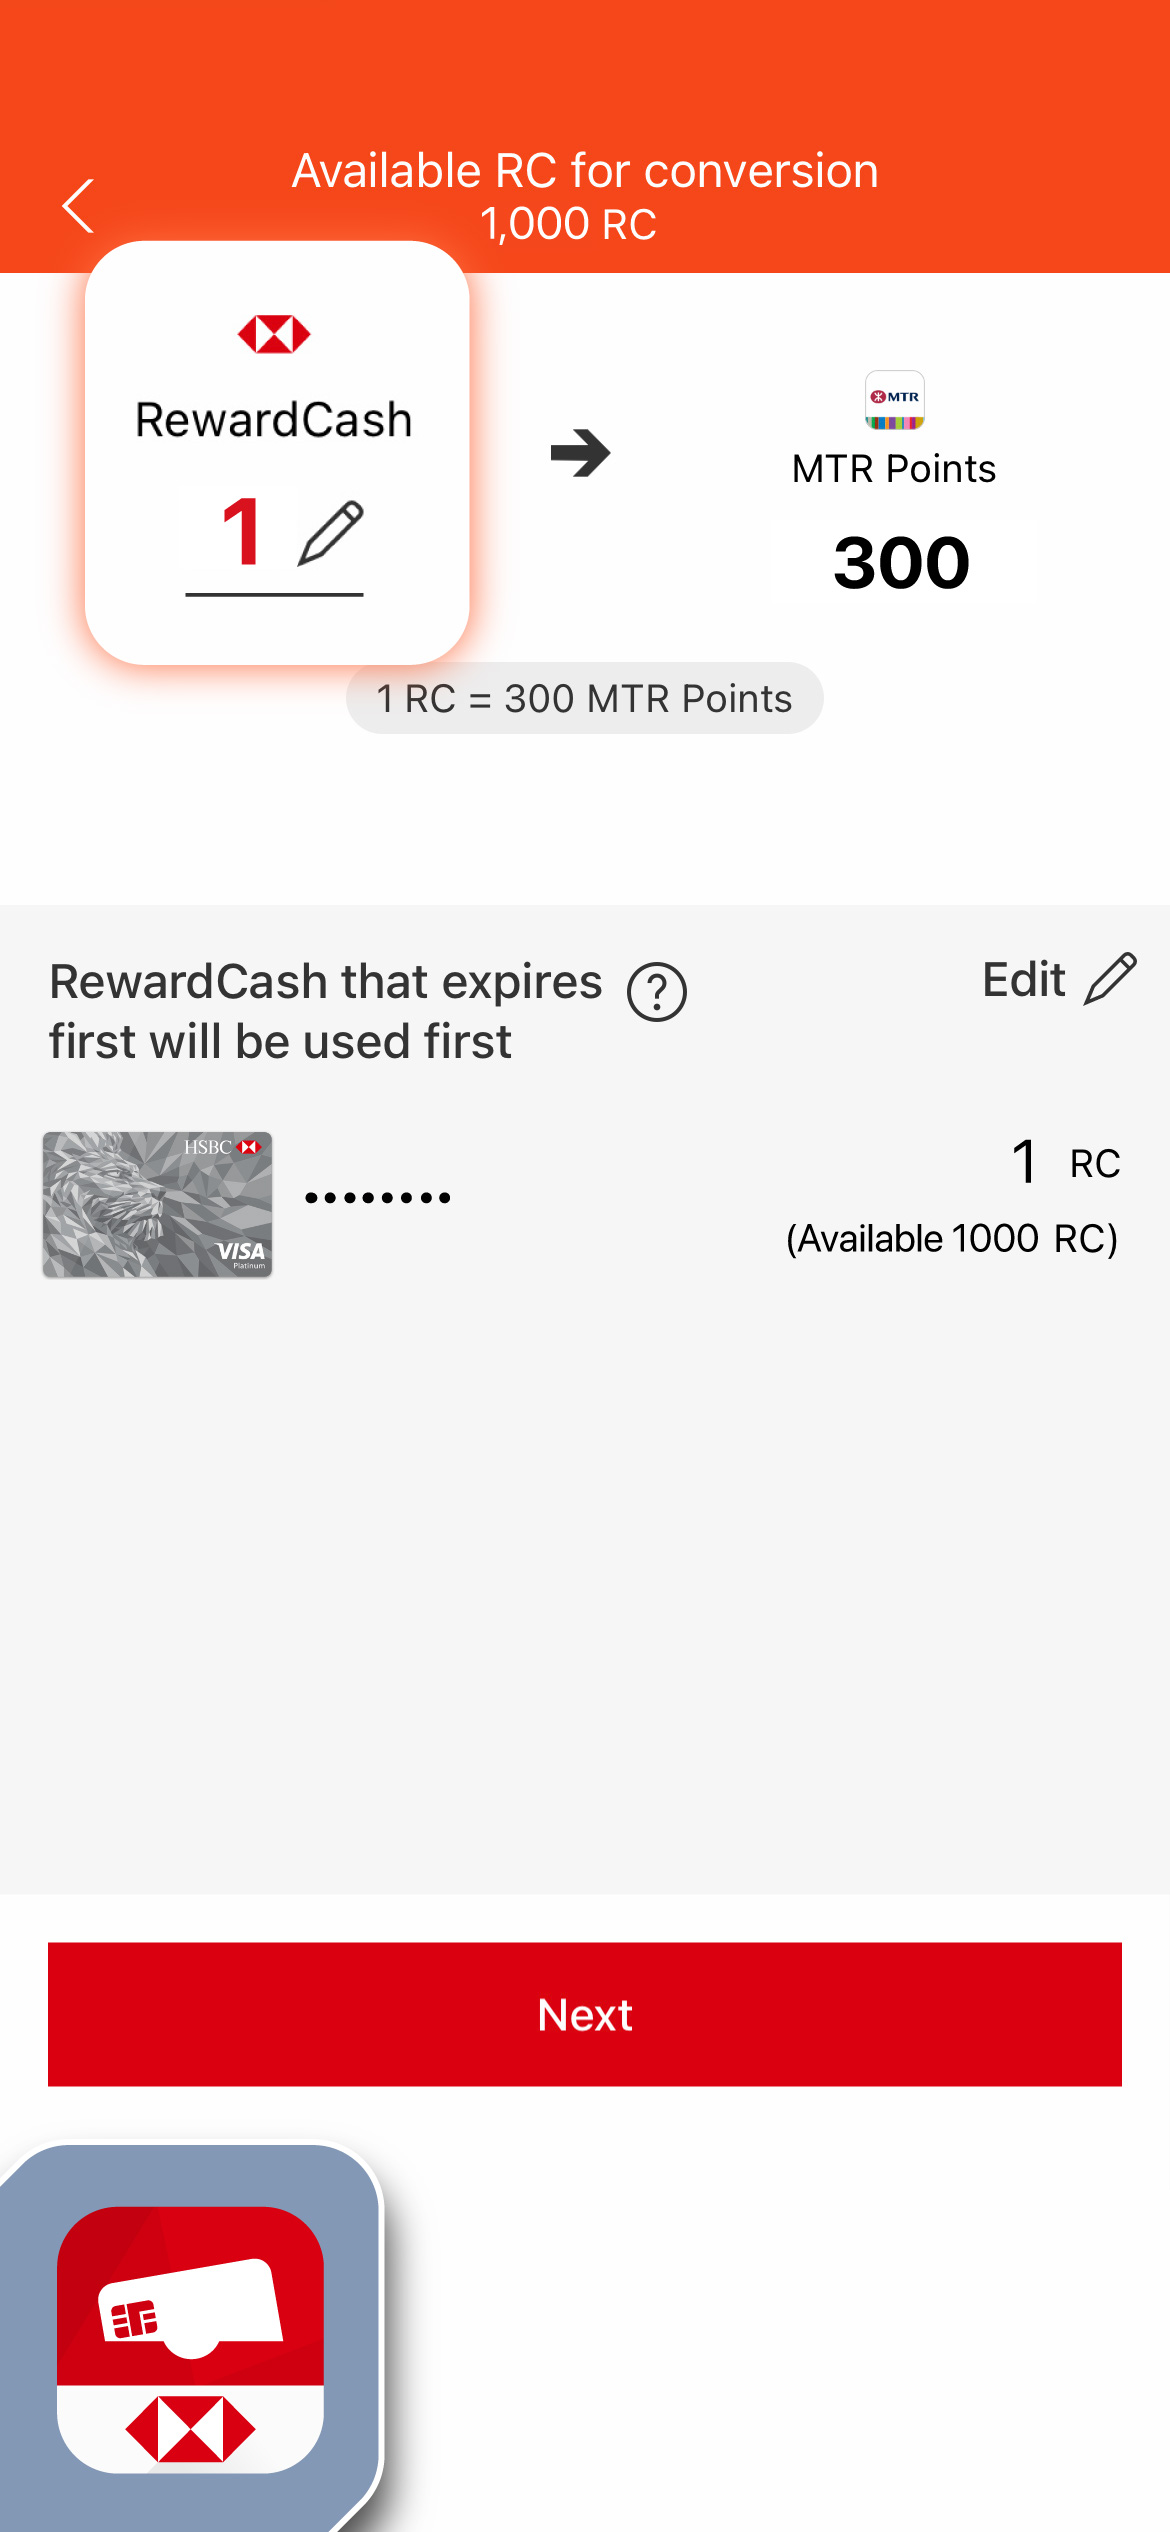 Enter the amount of RewardCash you would like to convert